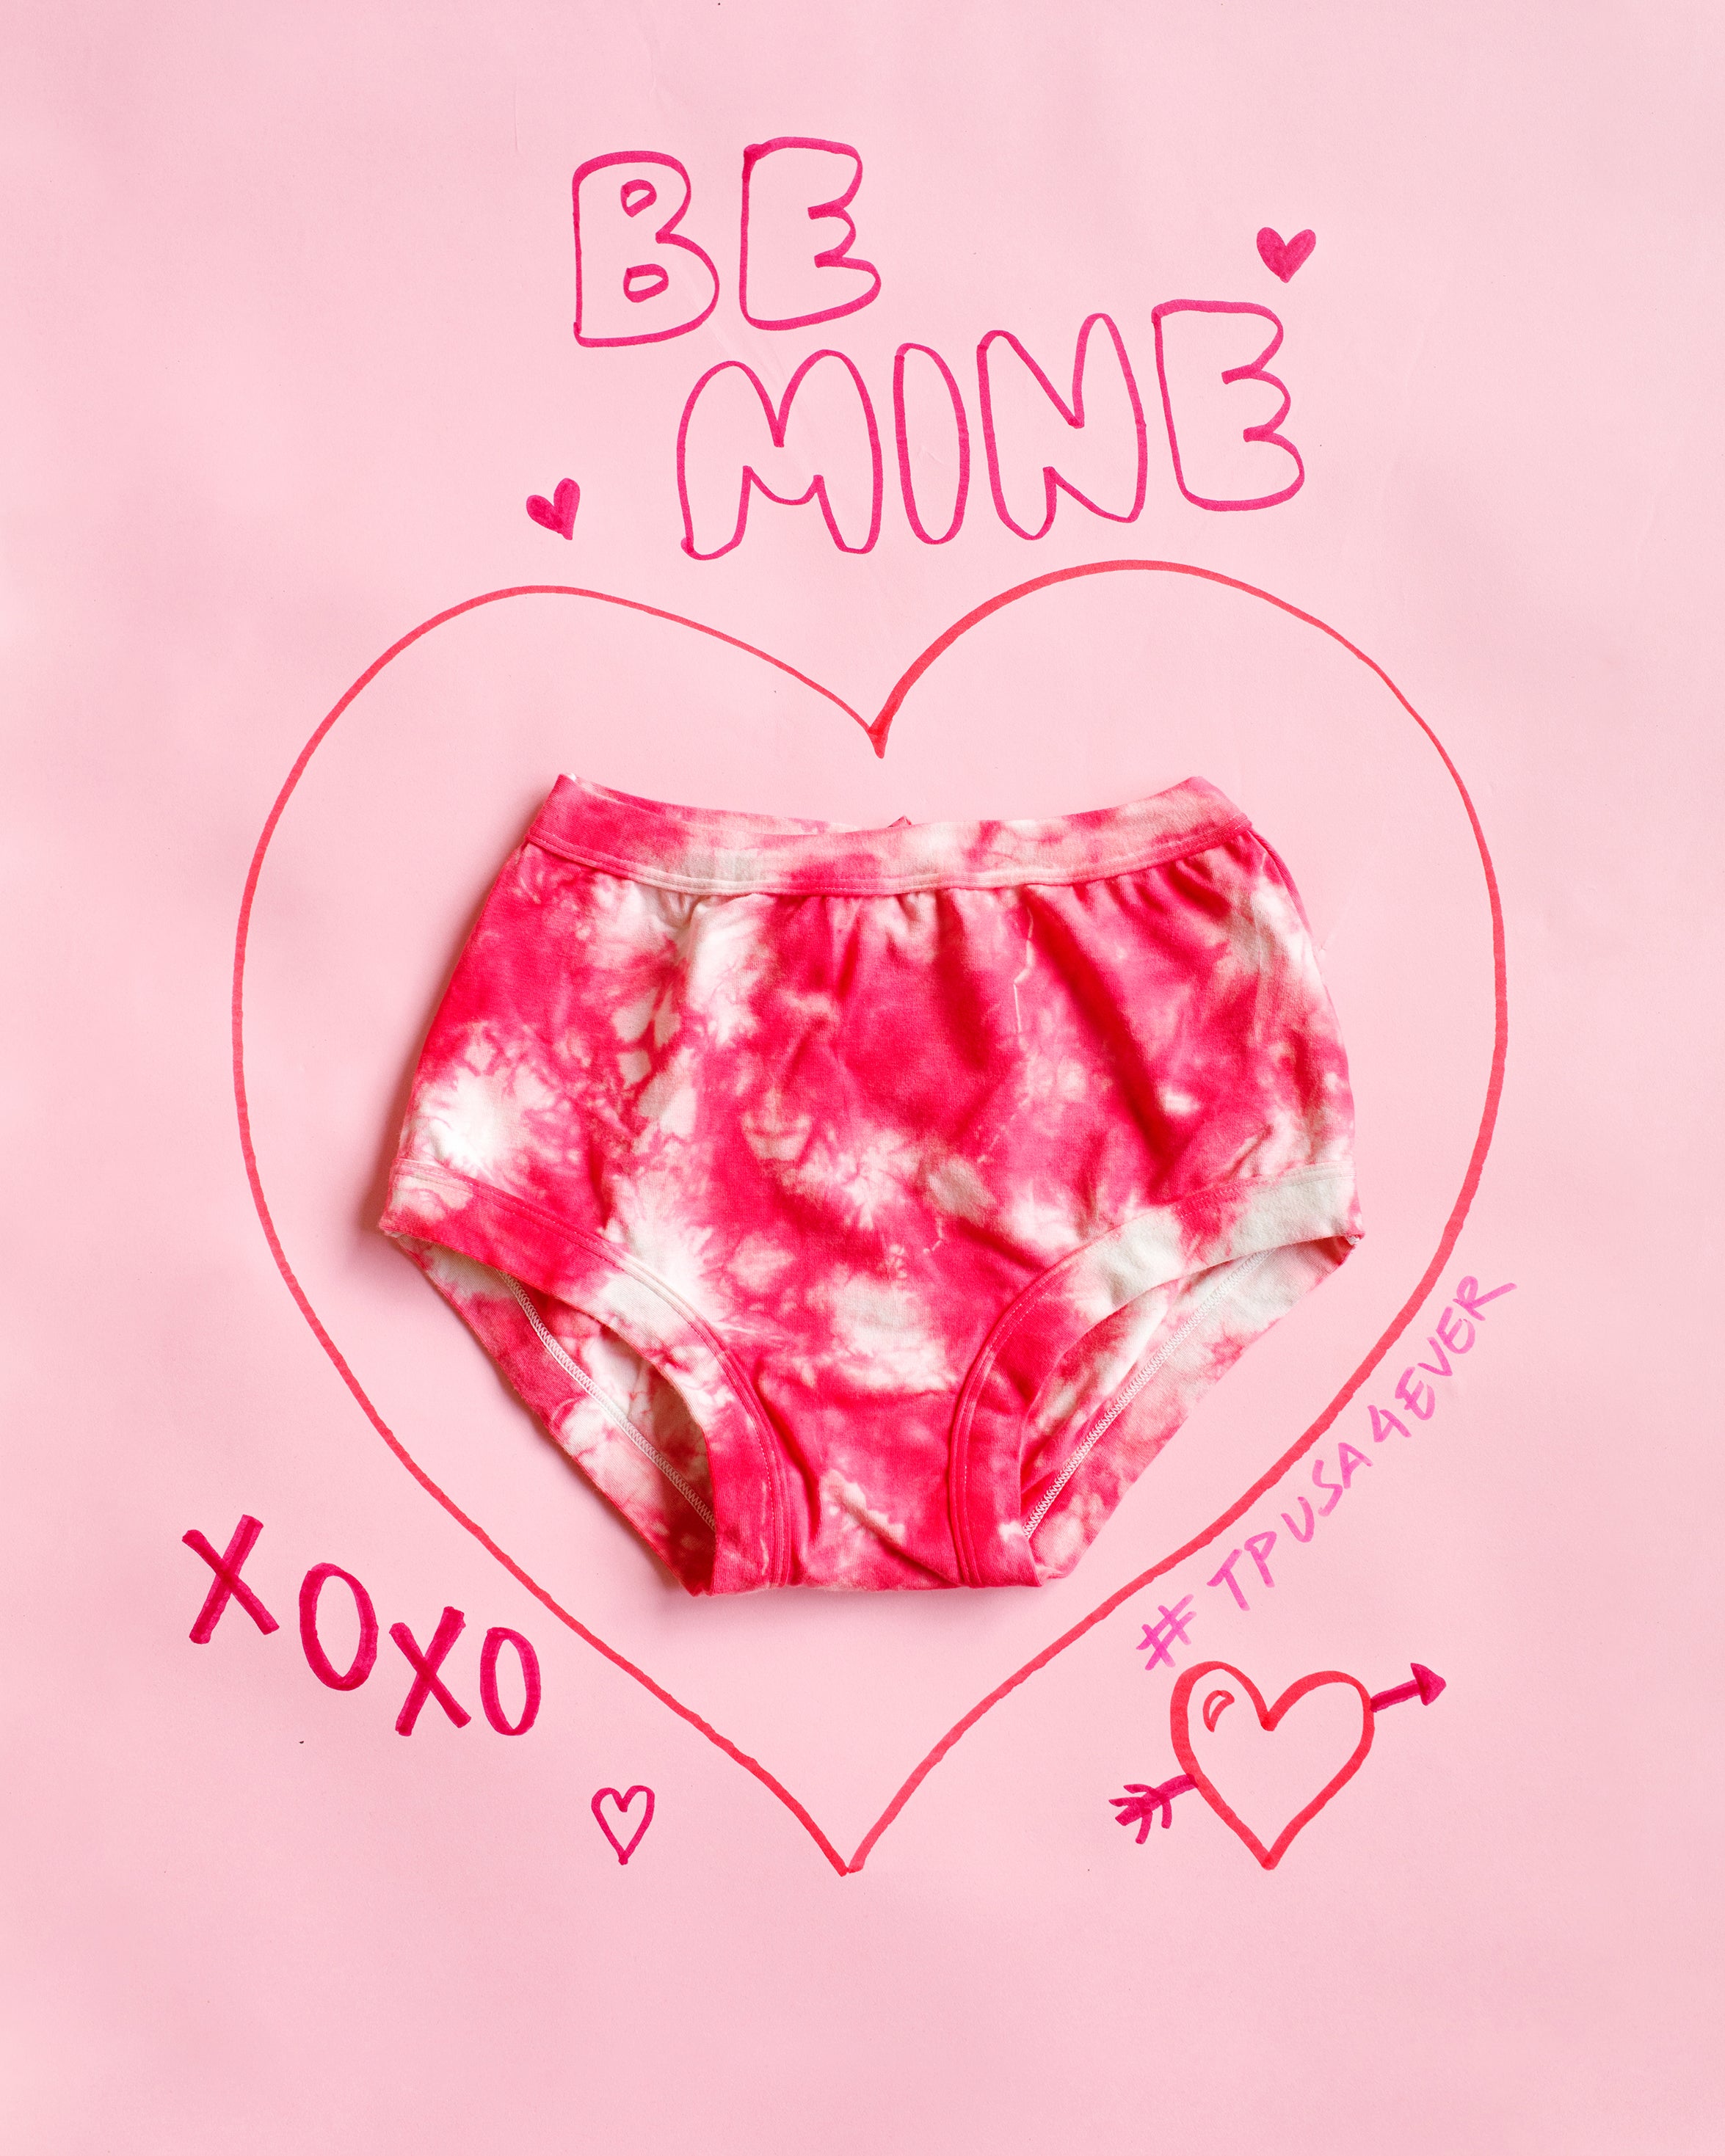 Flat lay of Thunderpants Original style underwear with red and white scrunch dye on a pink backdrop with writing.